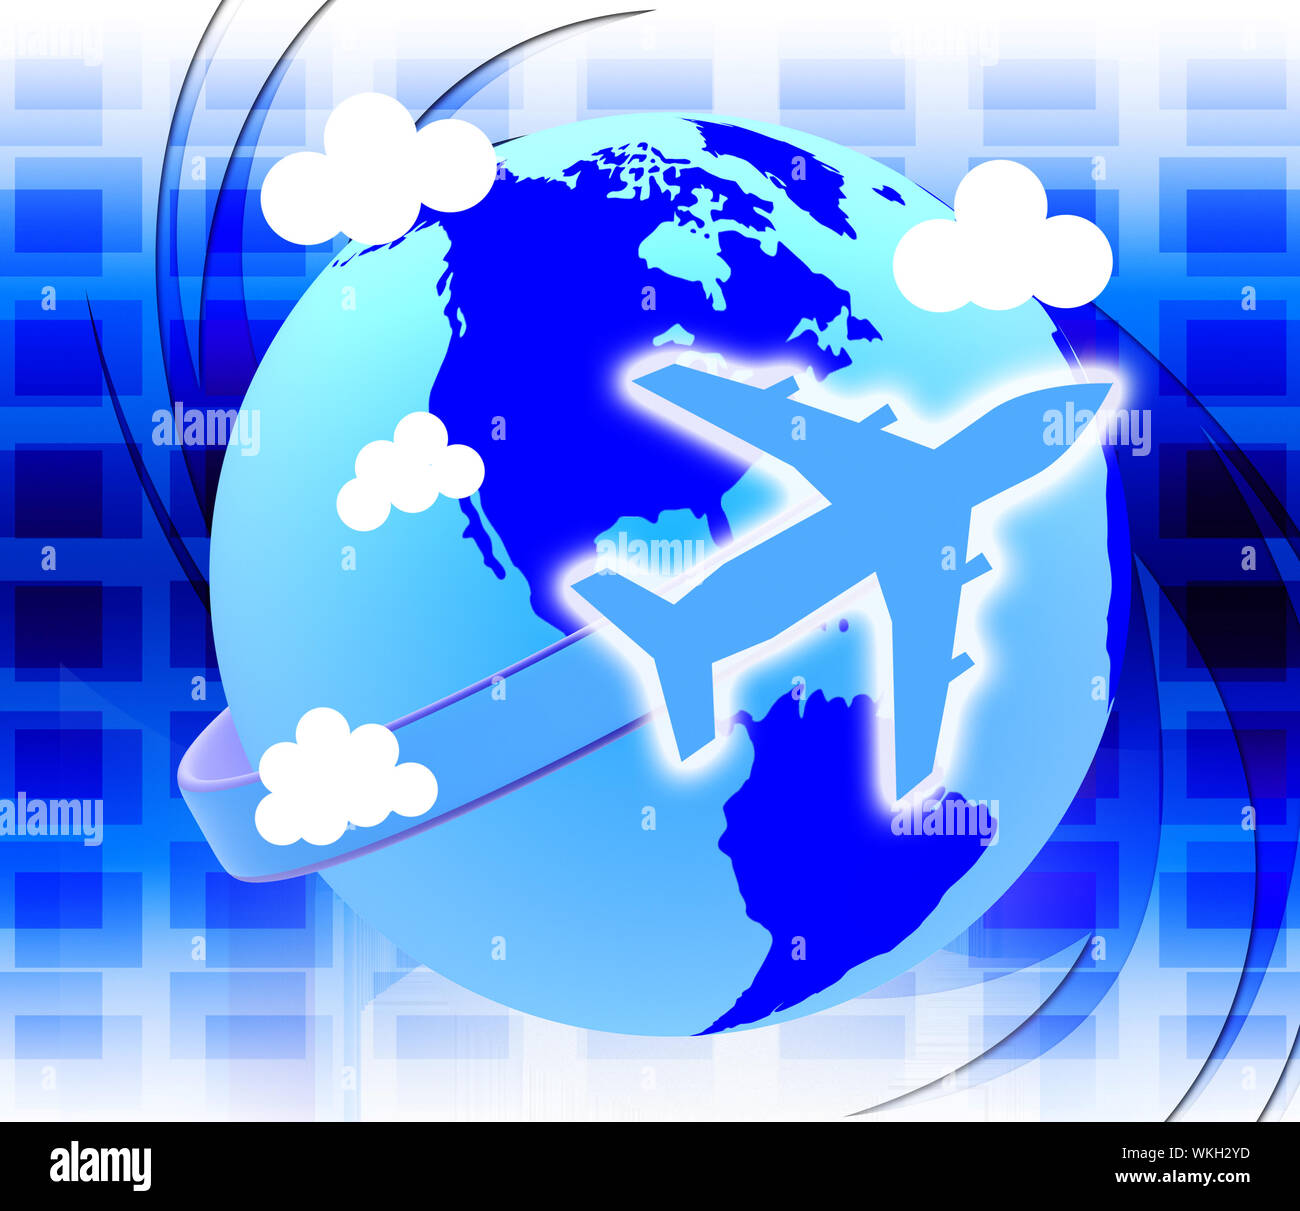 Global Travel Showing Globalisation Roam And Travels Stock Photo